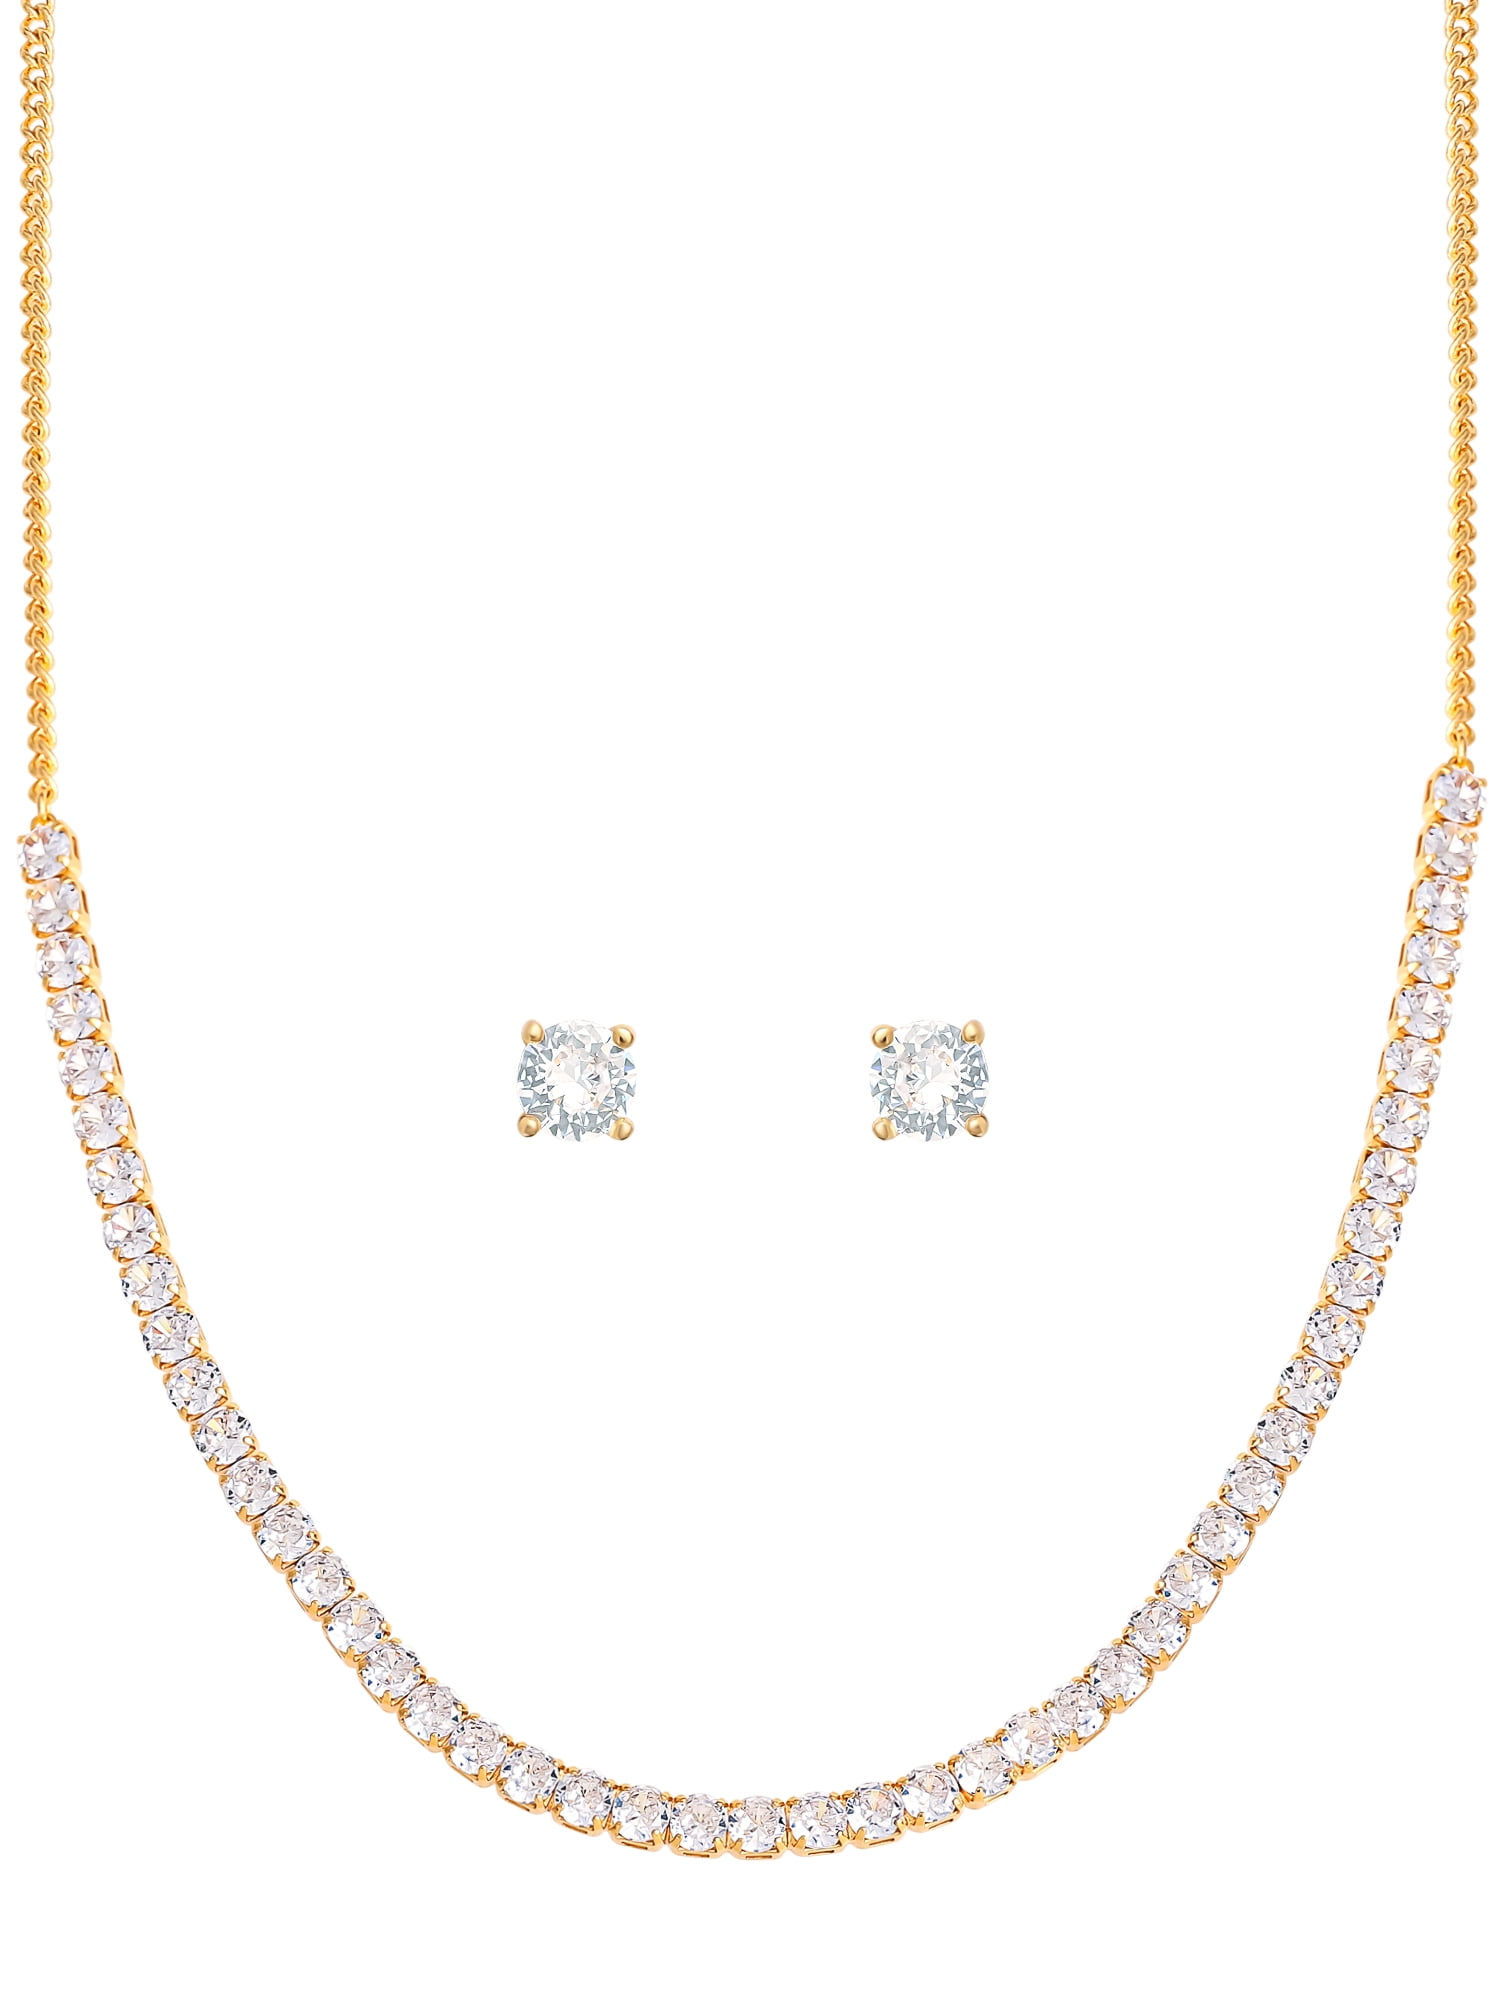 Two Layer Solitare Diamond Necklace Set By Asp Fashion Jewellery – 𝗔𝘀𝗽  𝗙𝗮𝘀𝗵𝗶𝗼𝗻 𝗝𝗲𝘄𝗲𝗹𝗹𝗲𝗿𝘆